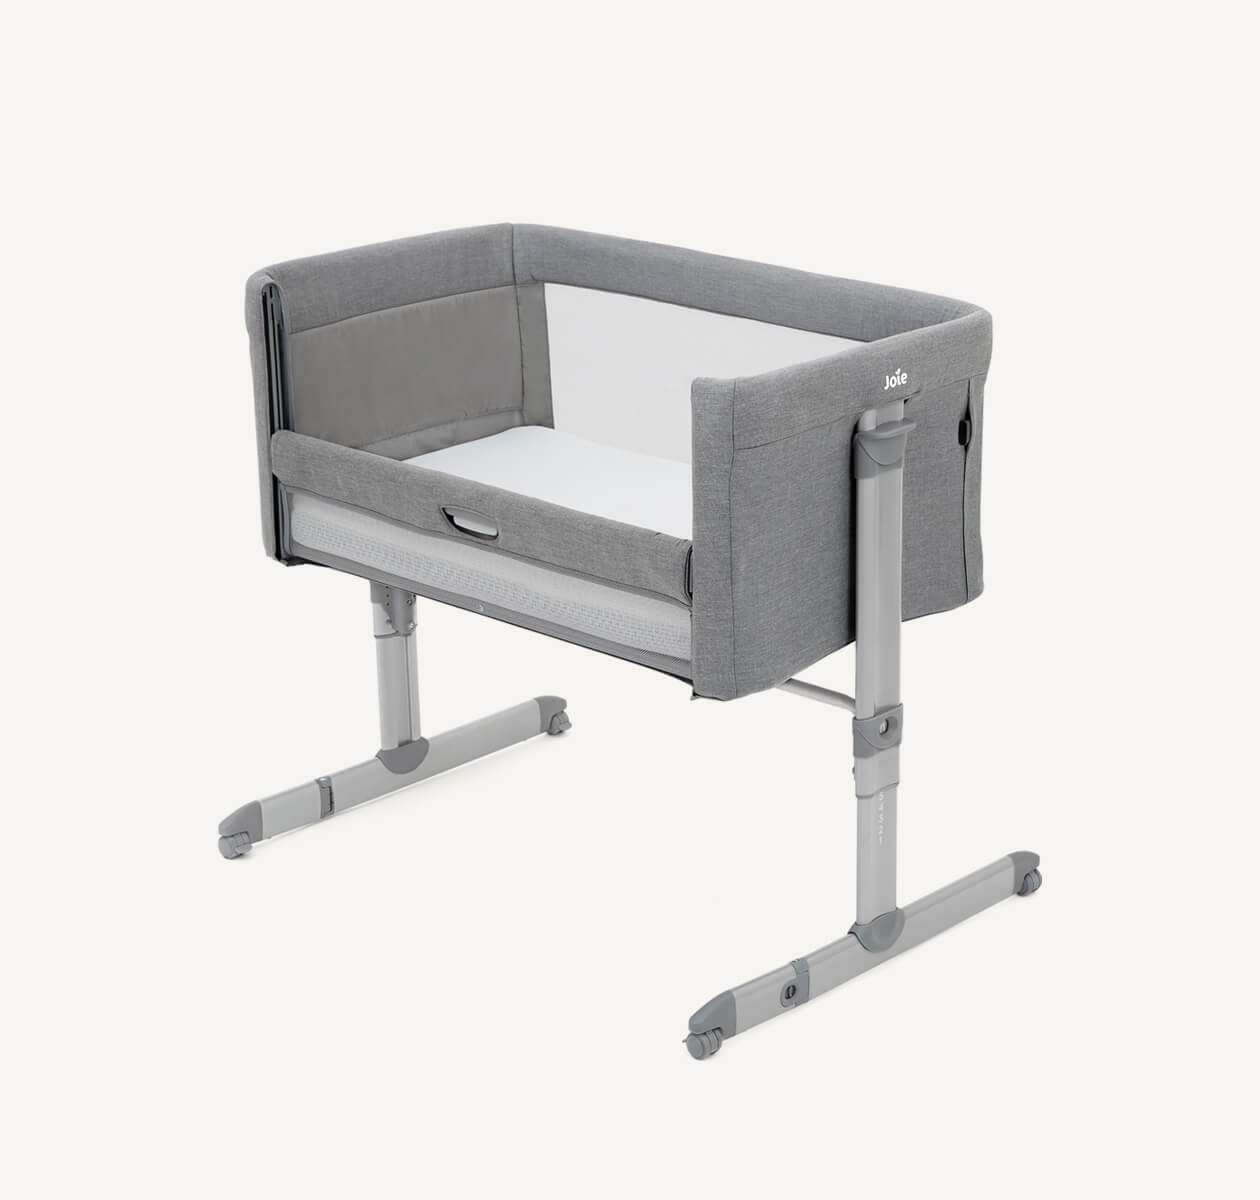  Light gray Joie roomie bedside crib at a right angle, with lift and lower side panel down.